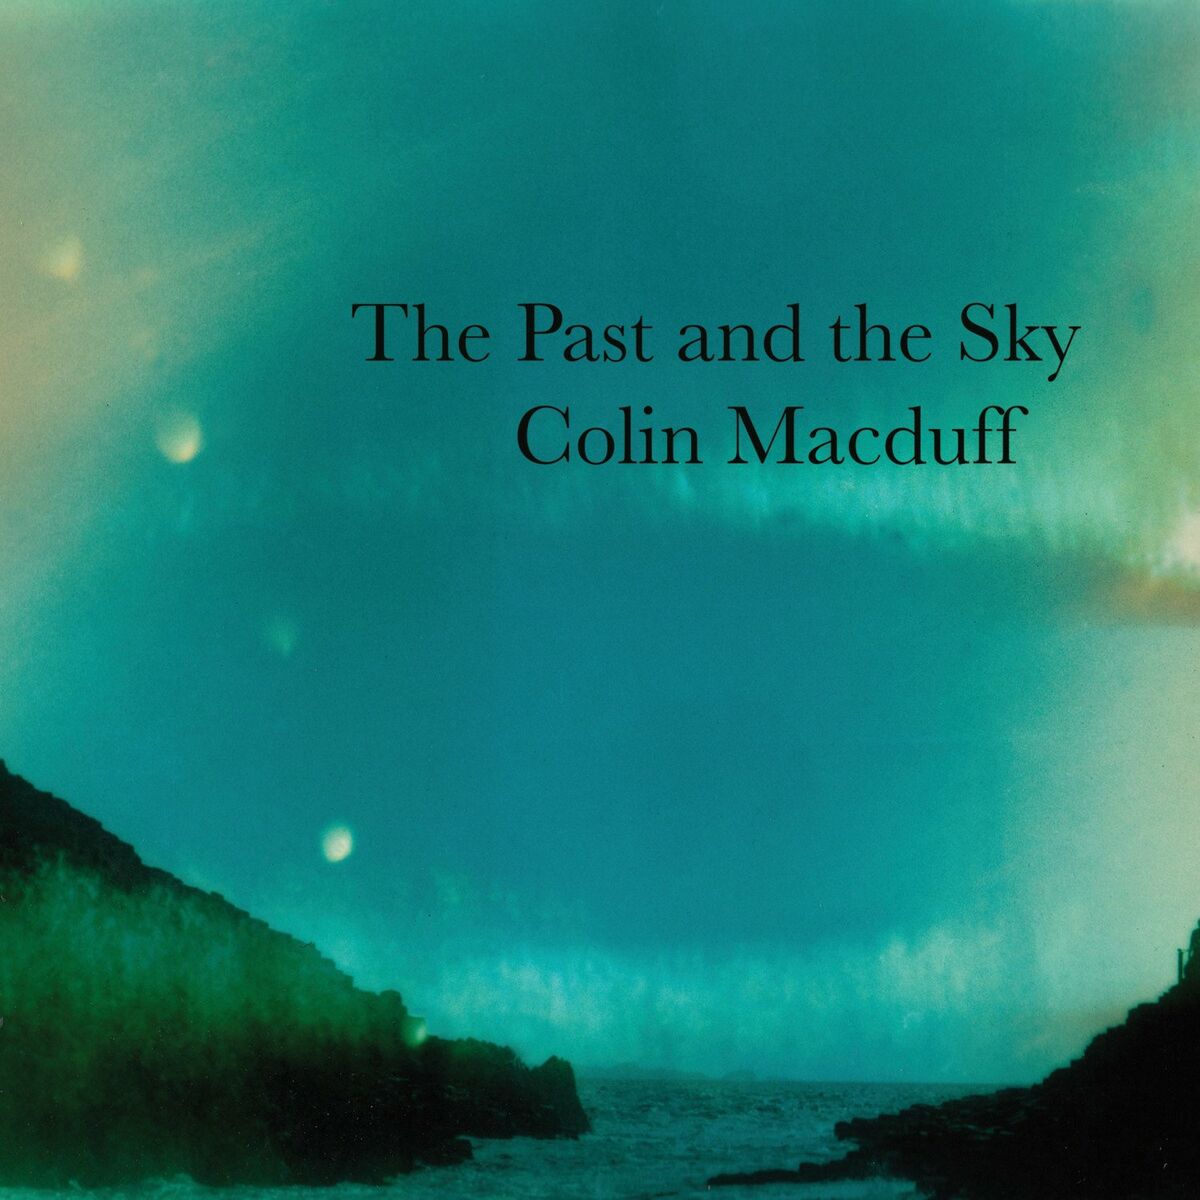 Colin Ma cduff - The Past and the Sky